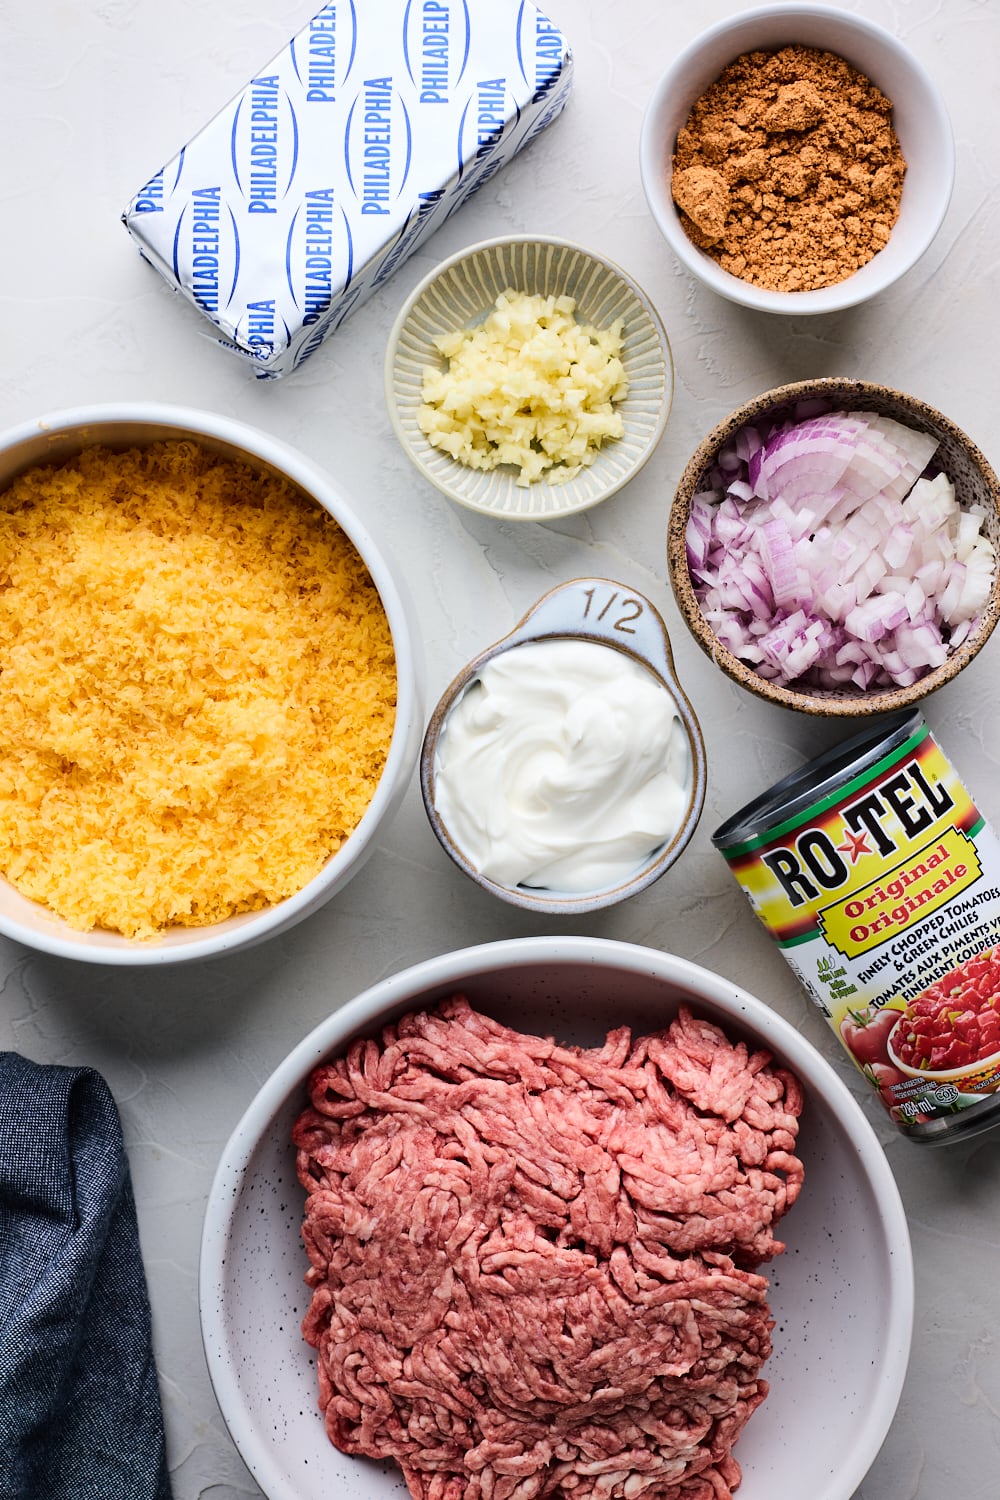 Easy Rotel Dip Ingredients Layed Out